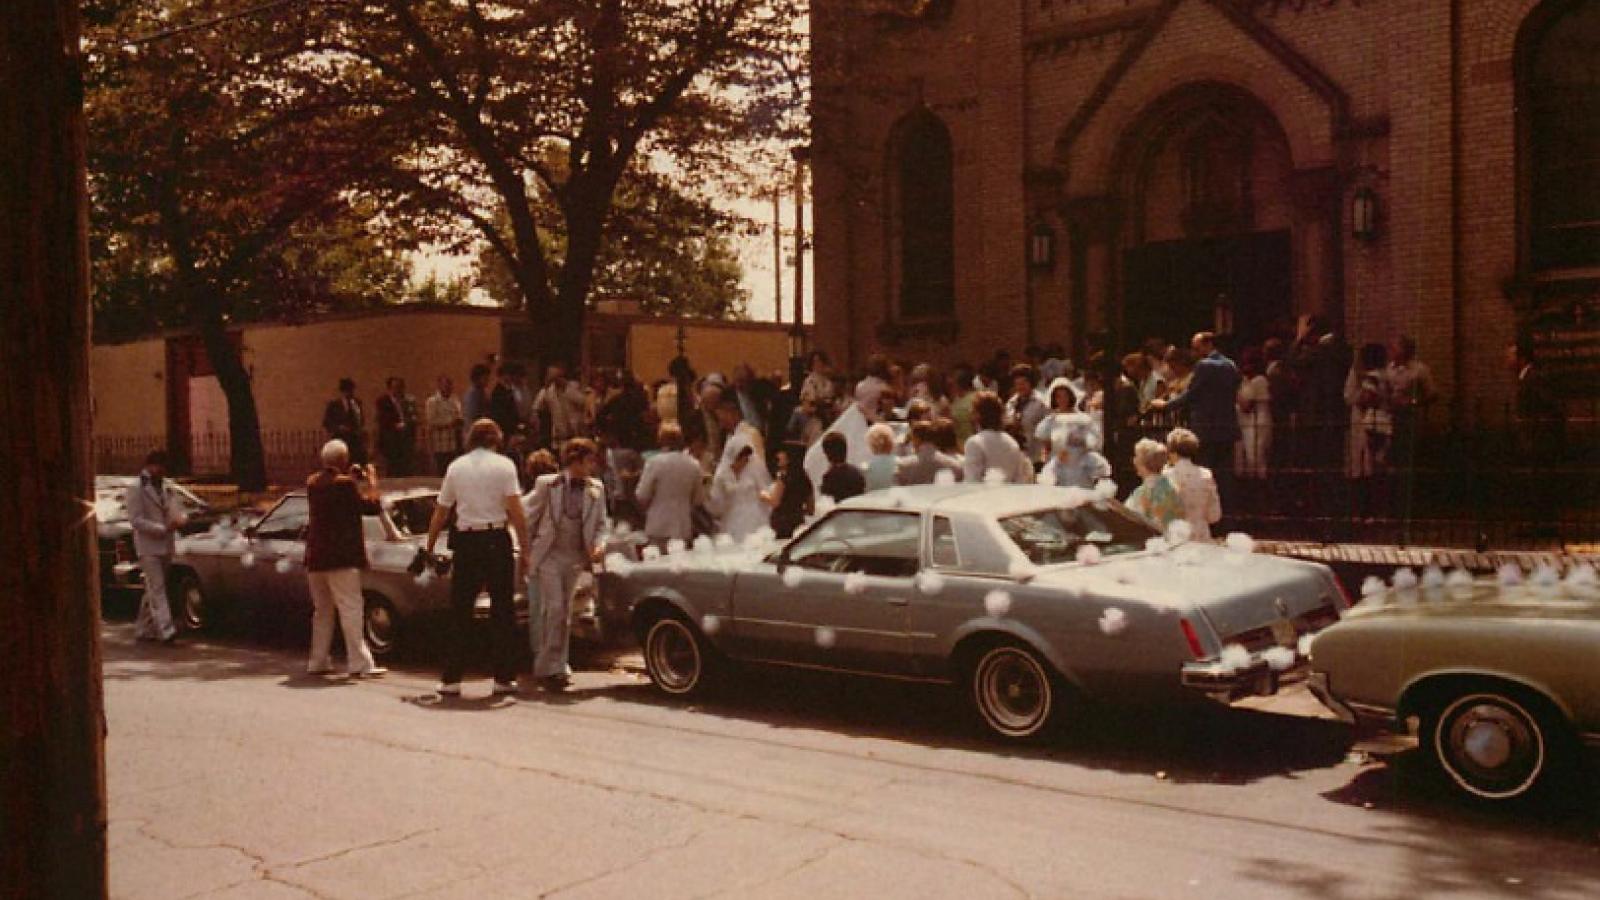 Wedding at St. Theodosius Russian Orthodox Cathedral, Cleveland, July 23, 1977.